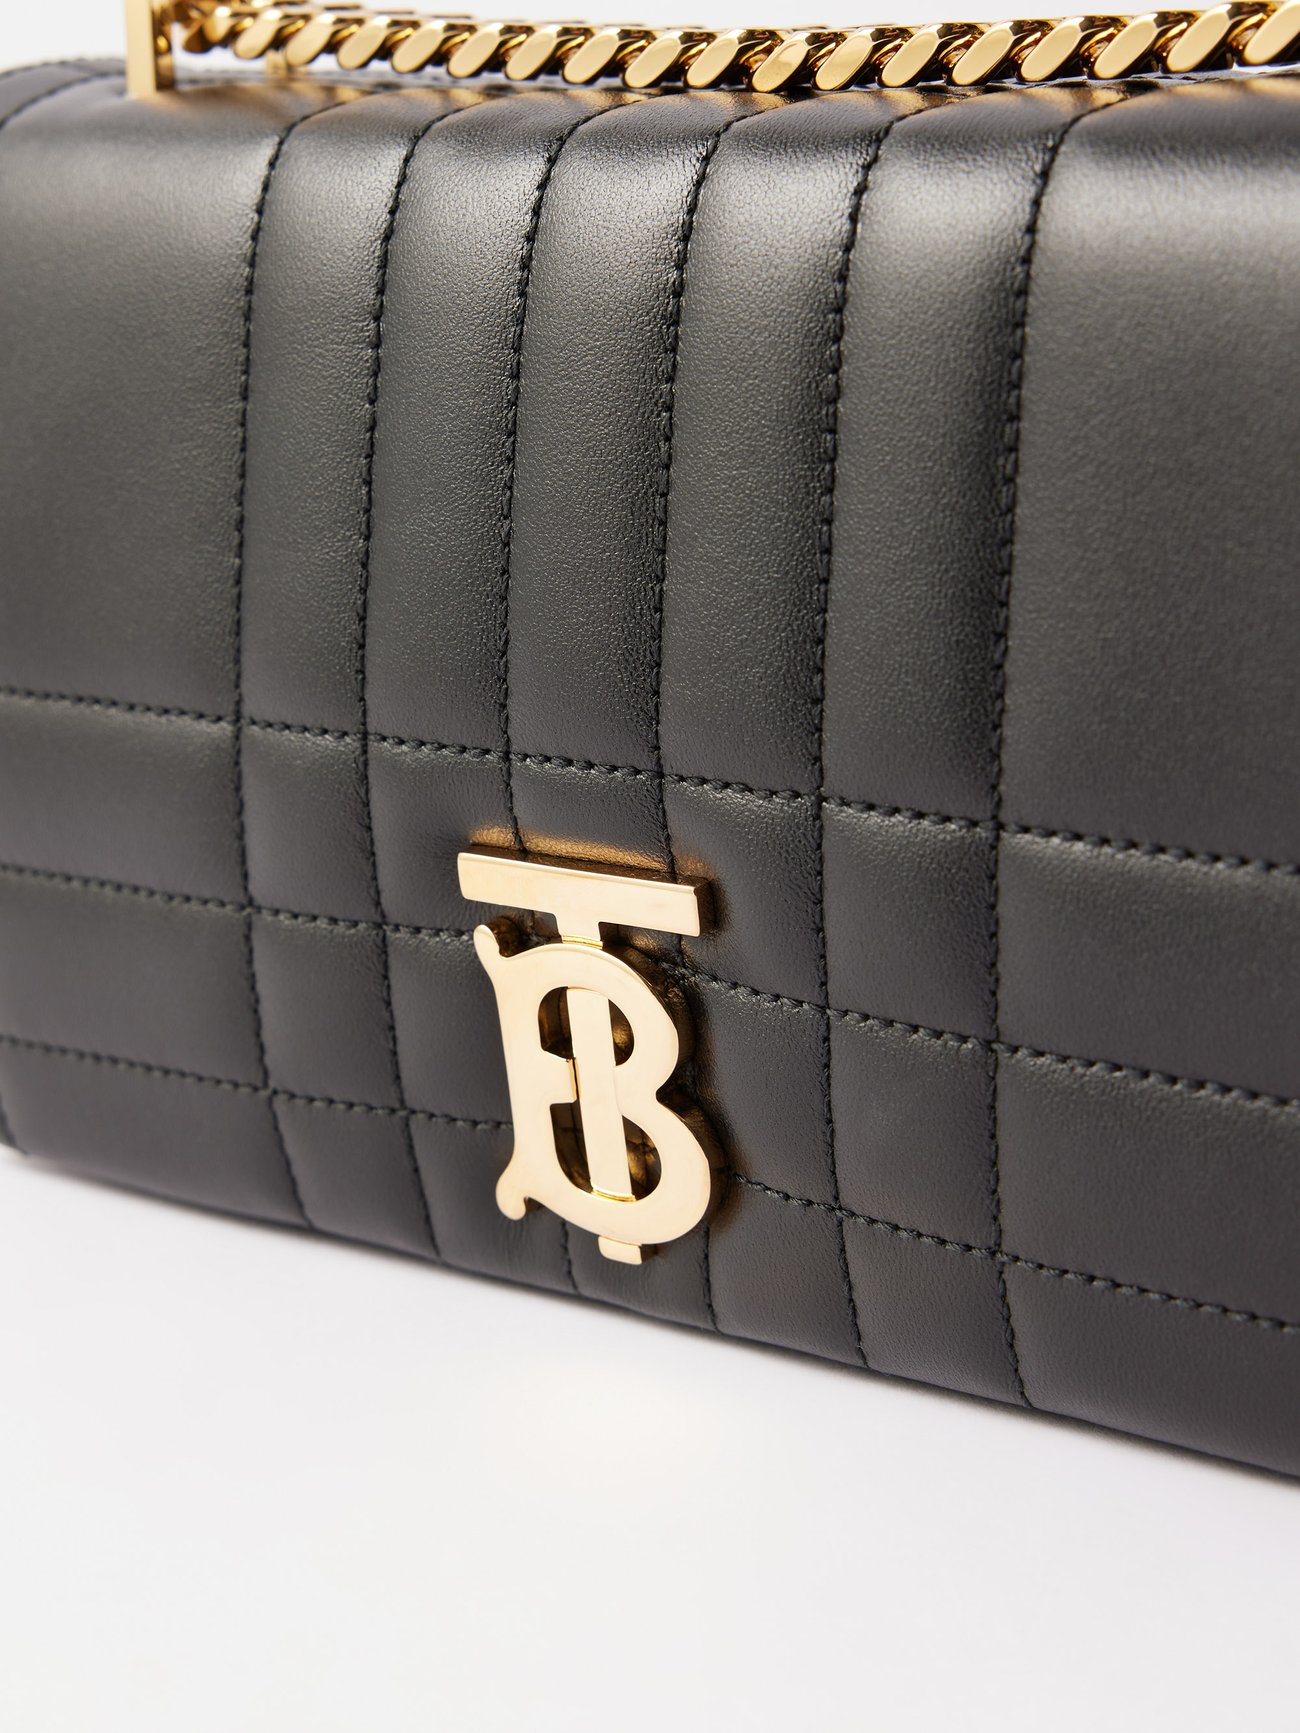 Burberry Lola Quilted Mini Shoulder Bag in Black